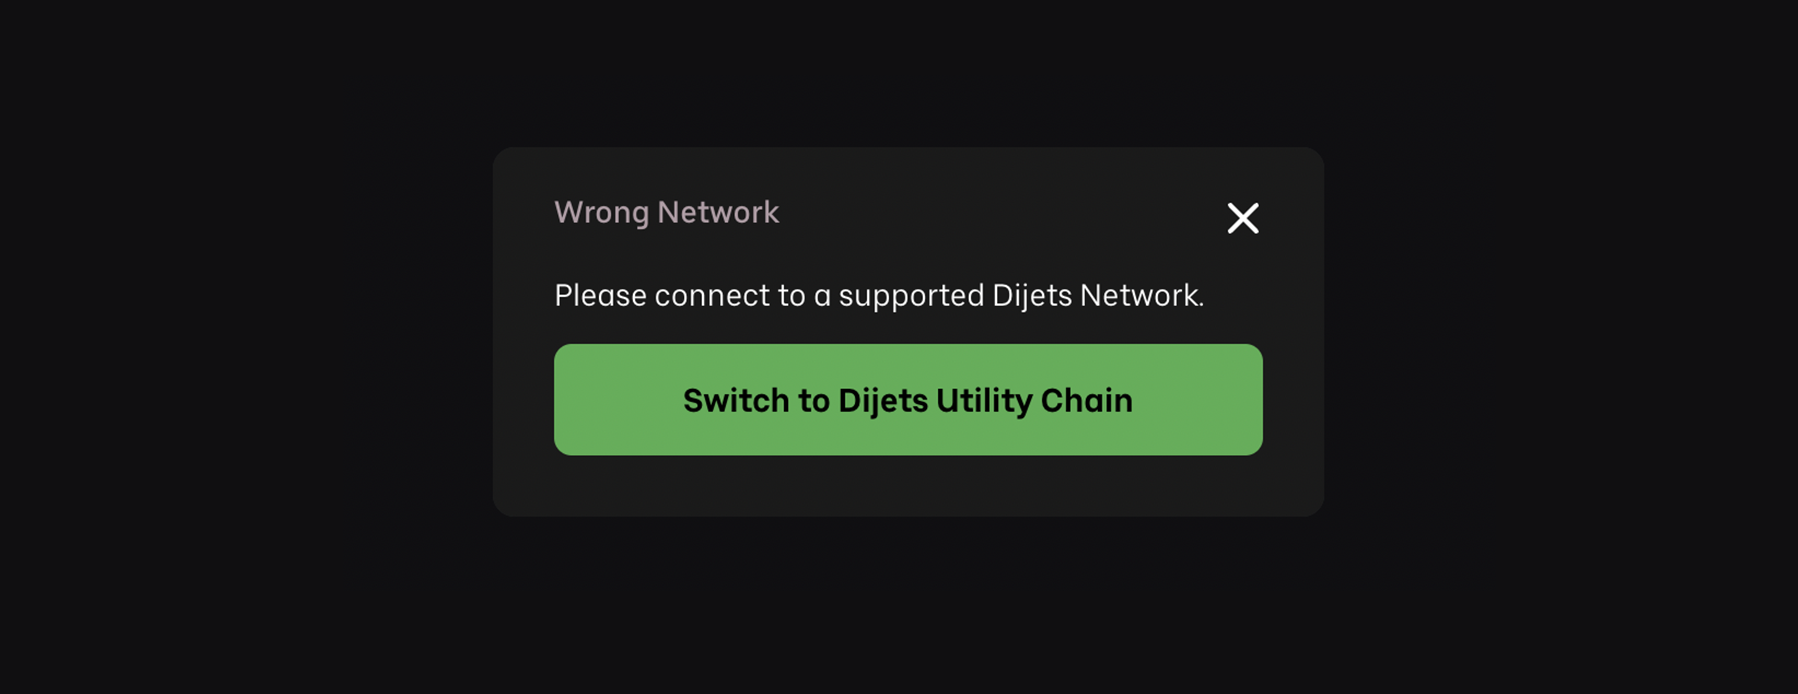 wrong network